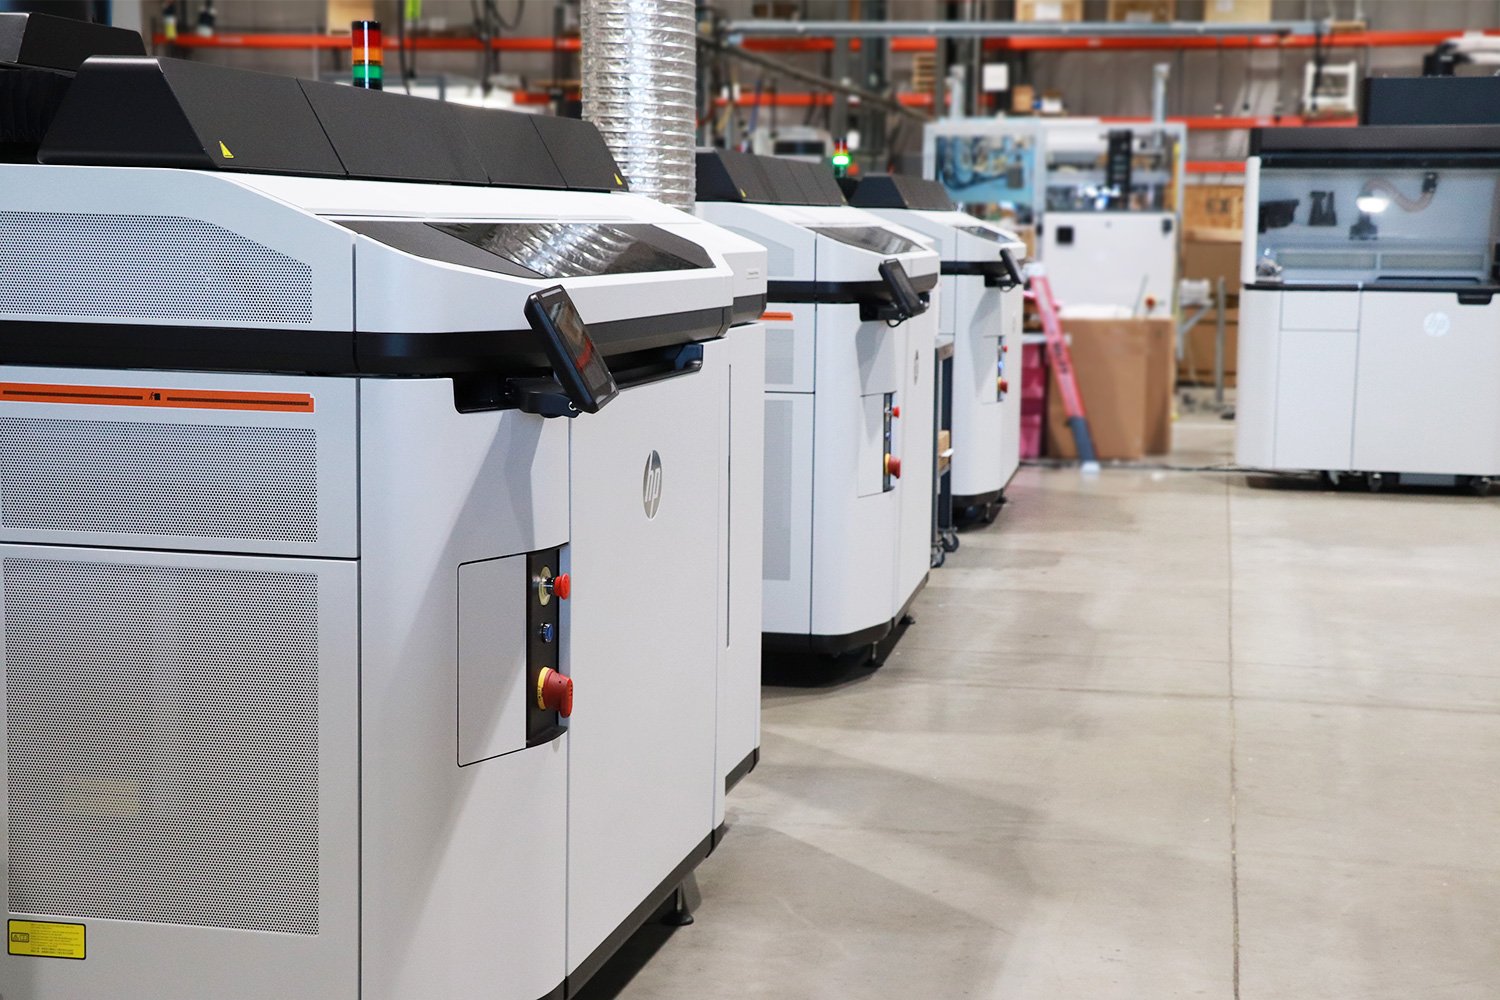 Extol partners with HP to launch Digital Development Center™ for 3D printing